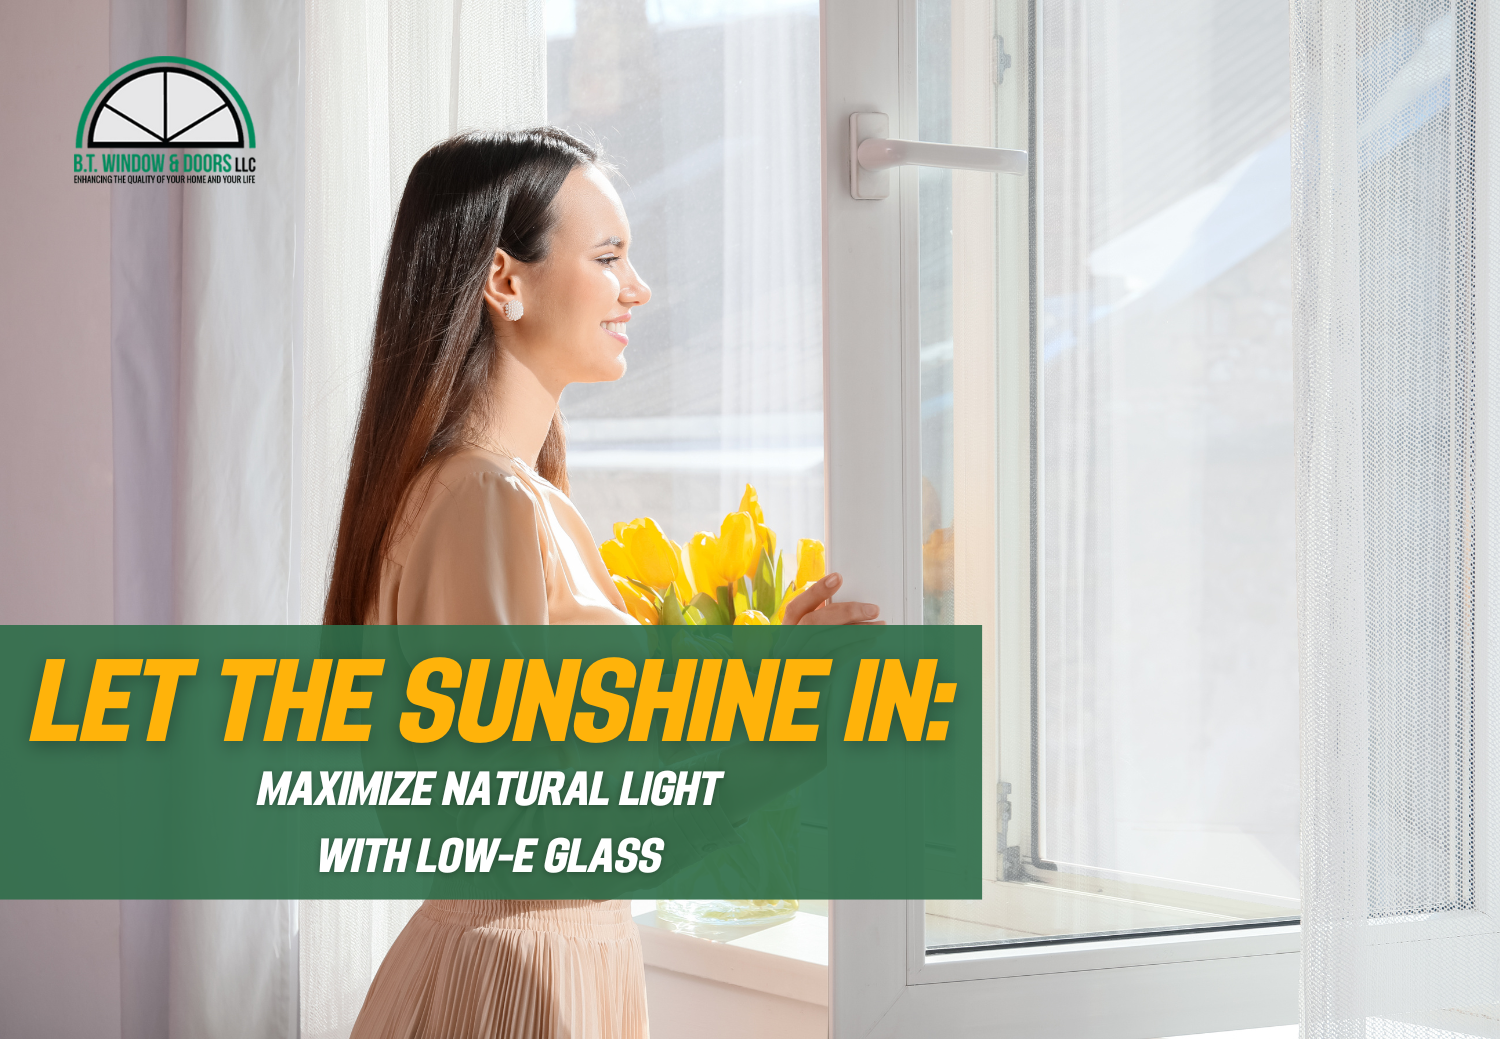 Let the Sunshine In: Maximize Natural Light with Low-E Glass